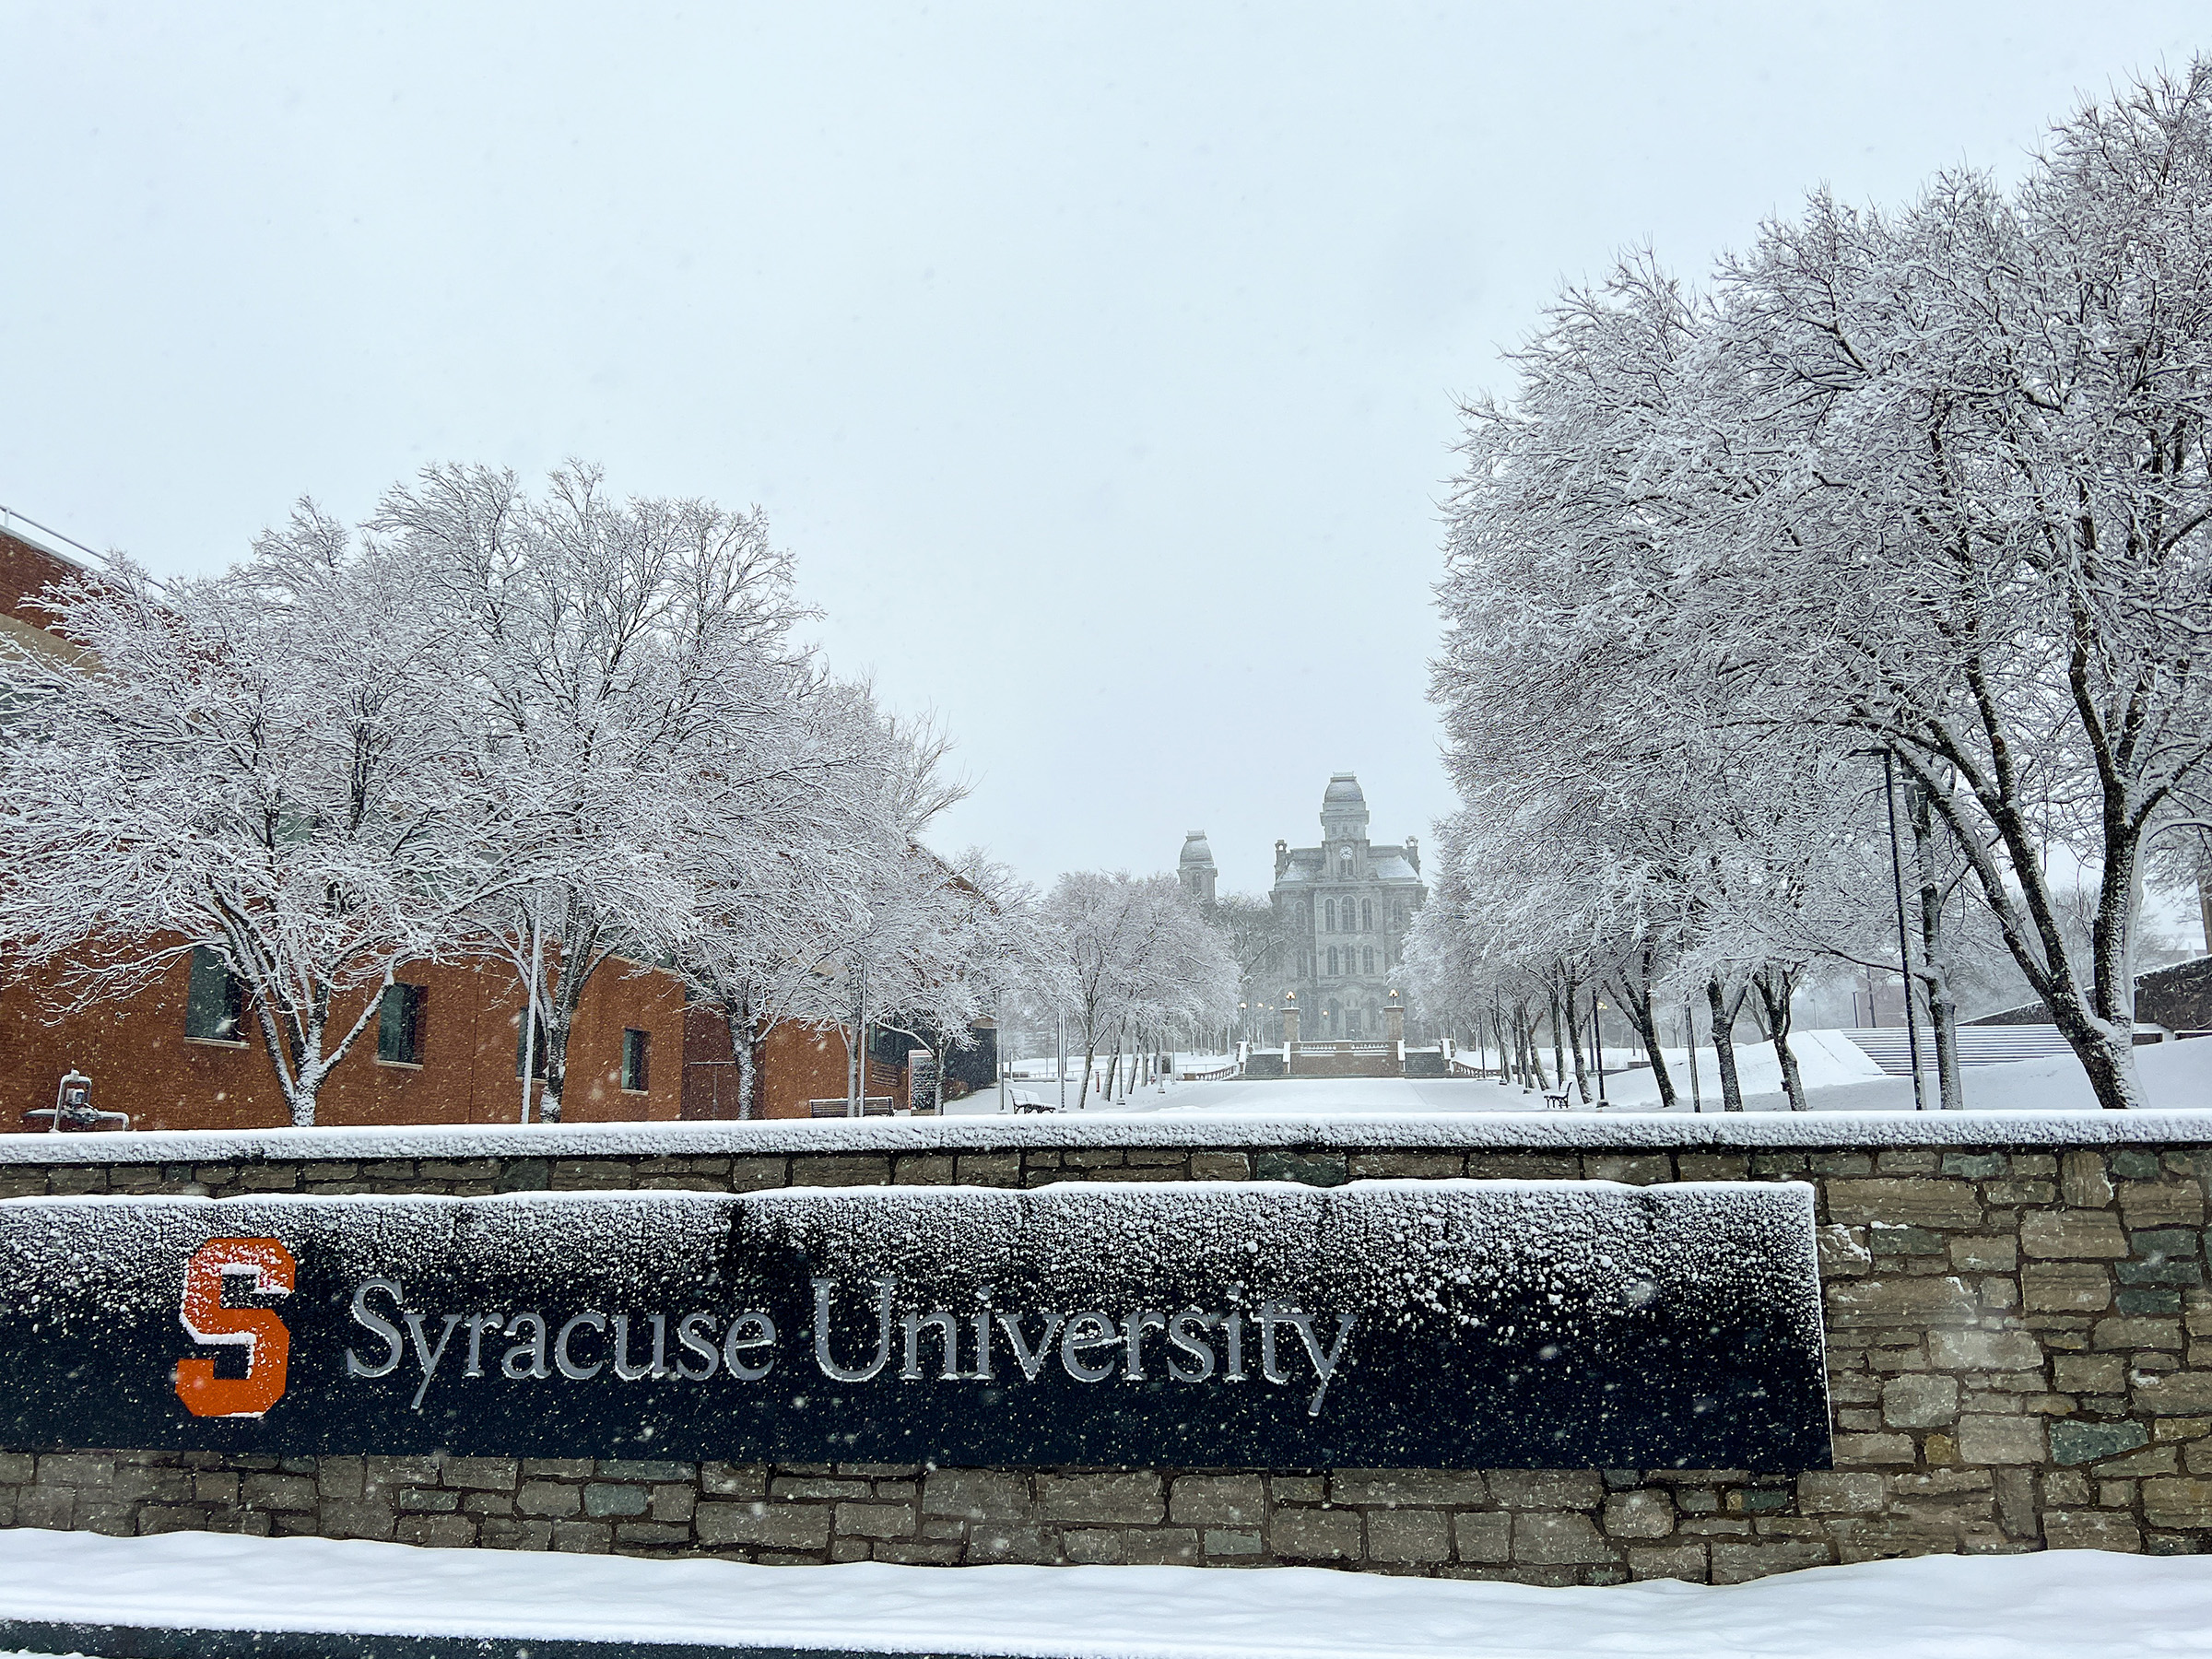 Snow lighting covering trees and buildings on campus.